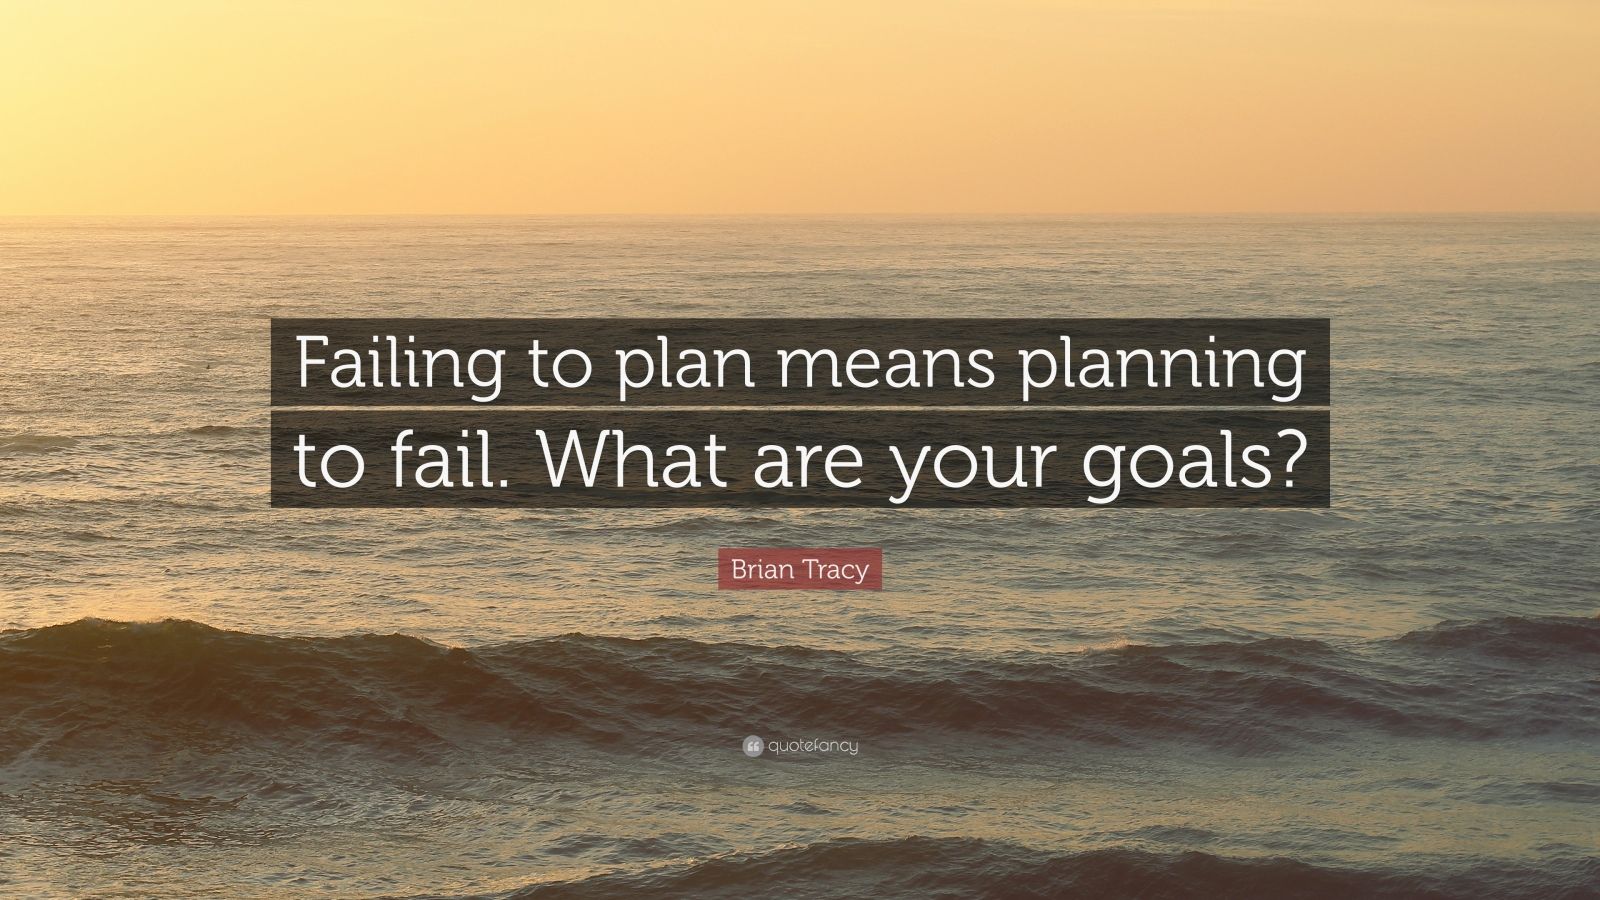 Brian Tracy Quote: “Failing to plan means planning to fail. What are